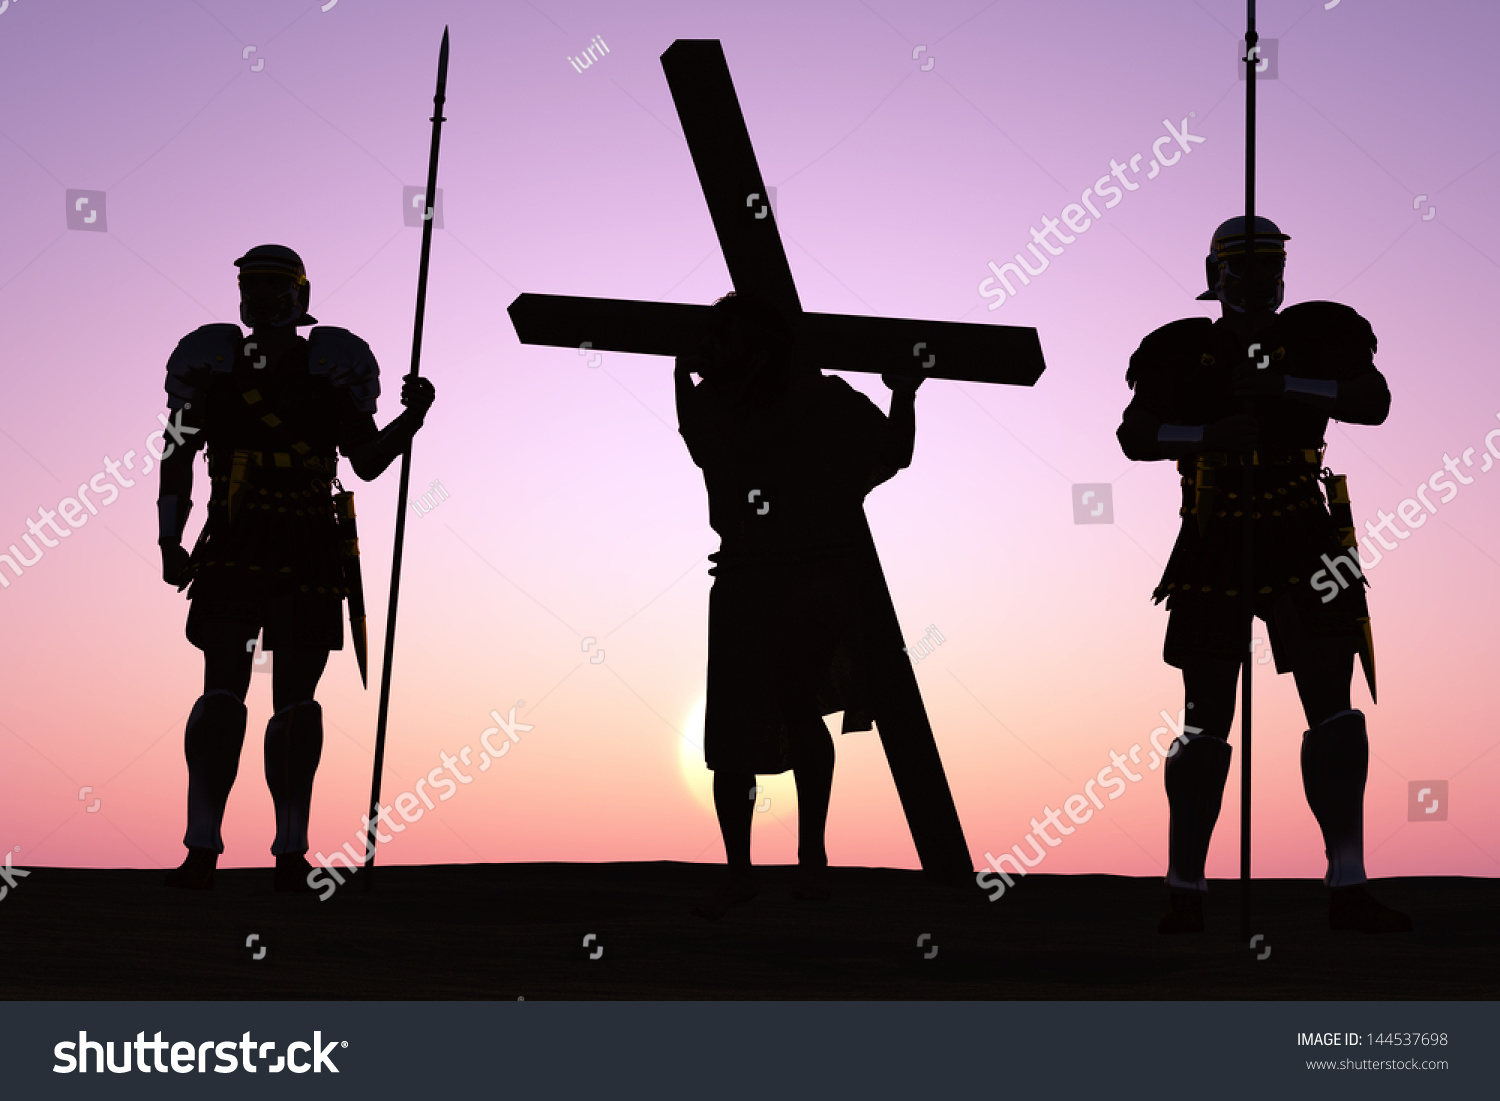 crucified-jesus-soldiers-stock-illustration-144537698-shutterstock